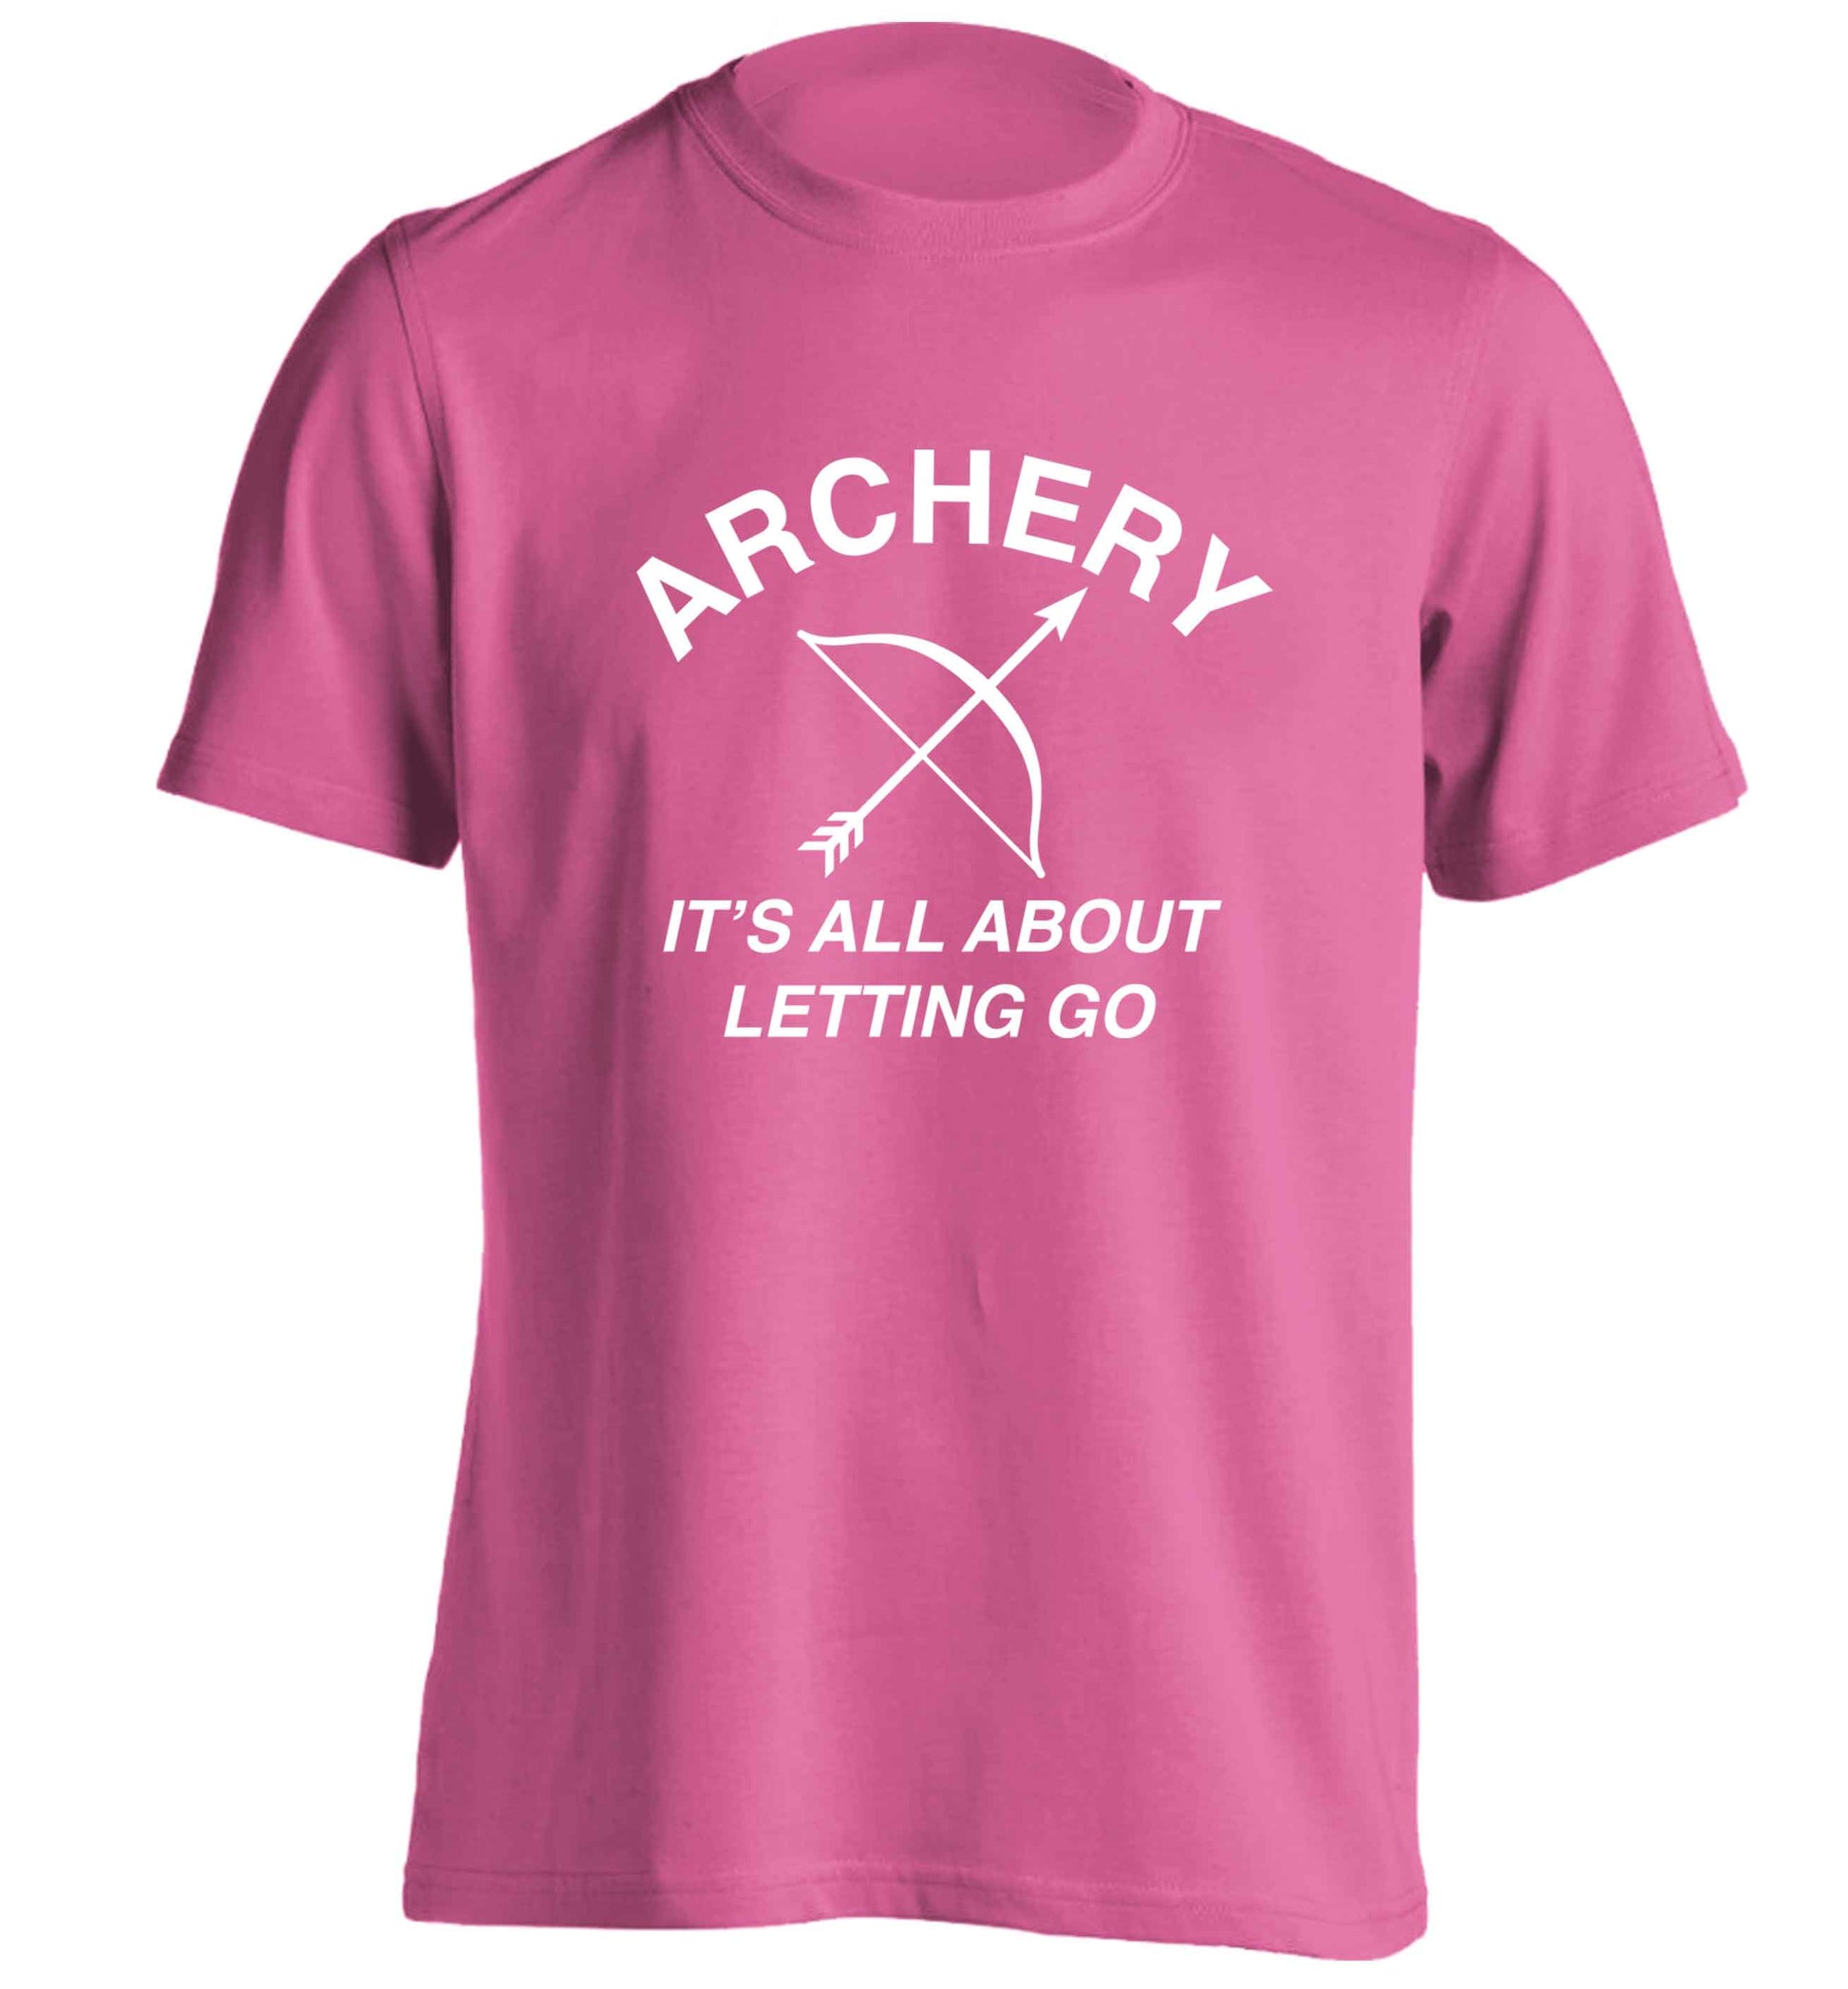 Archery it's all about letting go adults unisex pink Tshirt 2XL